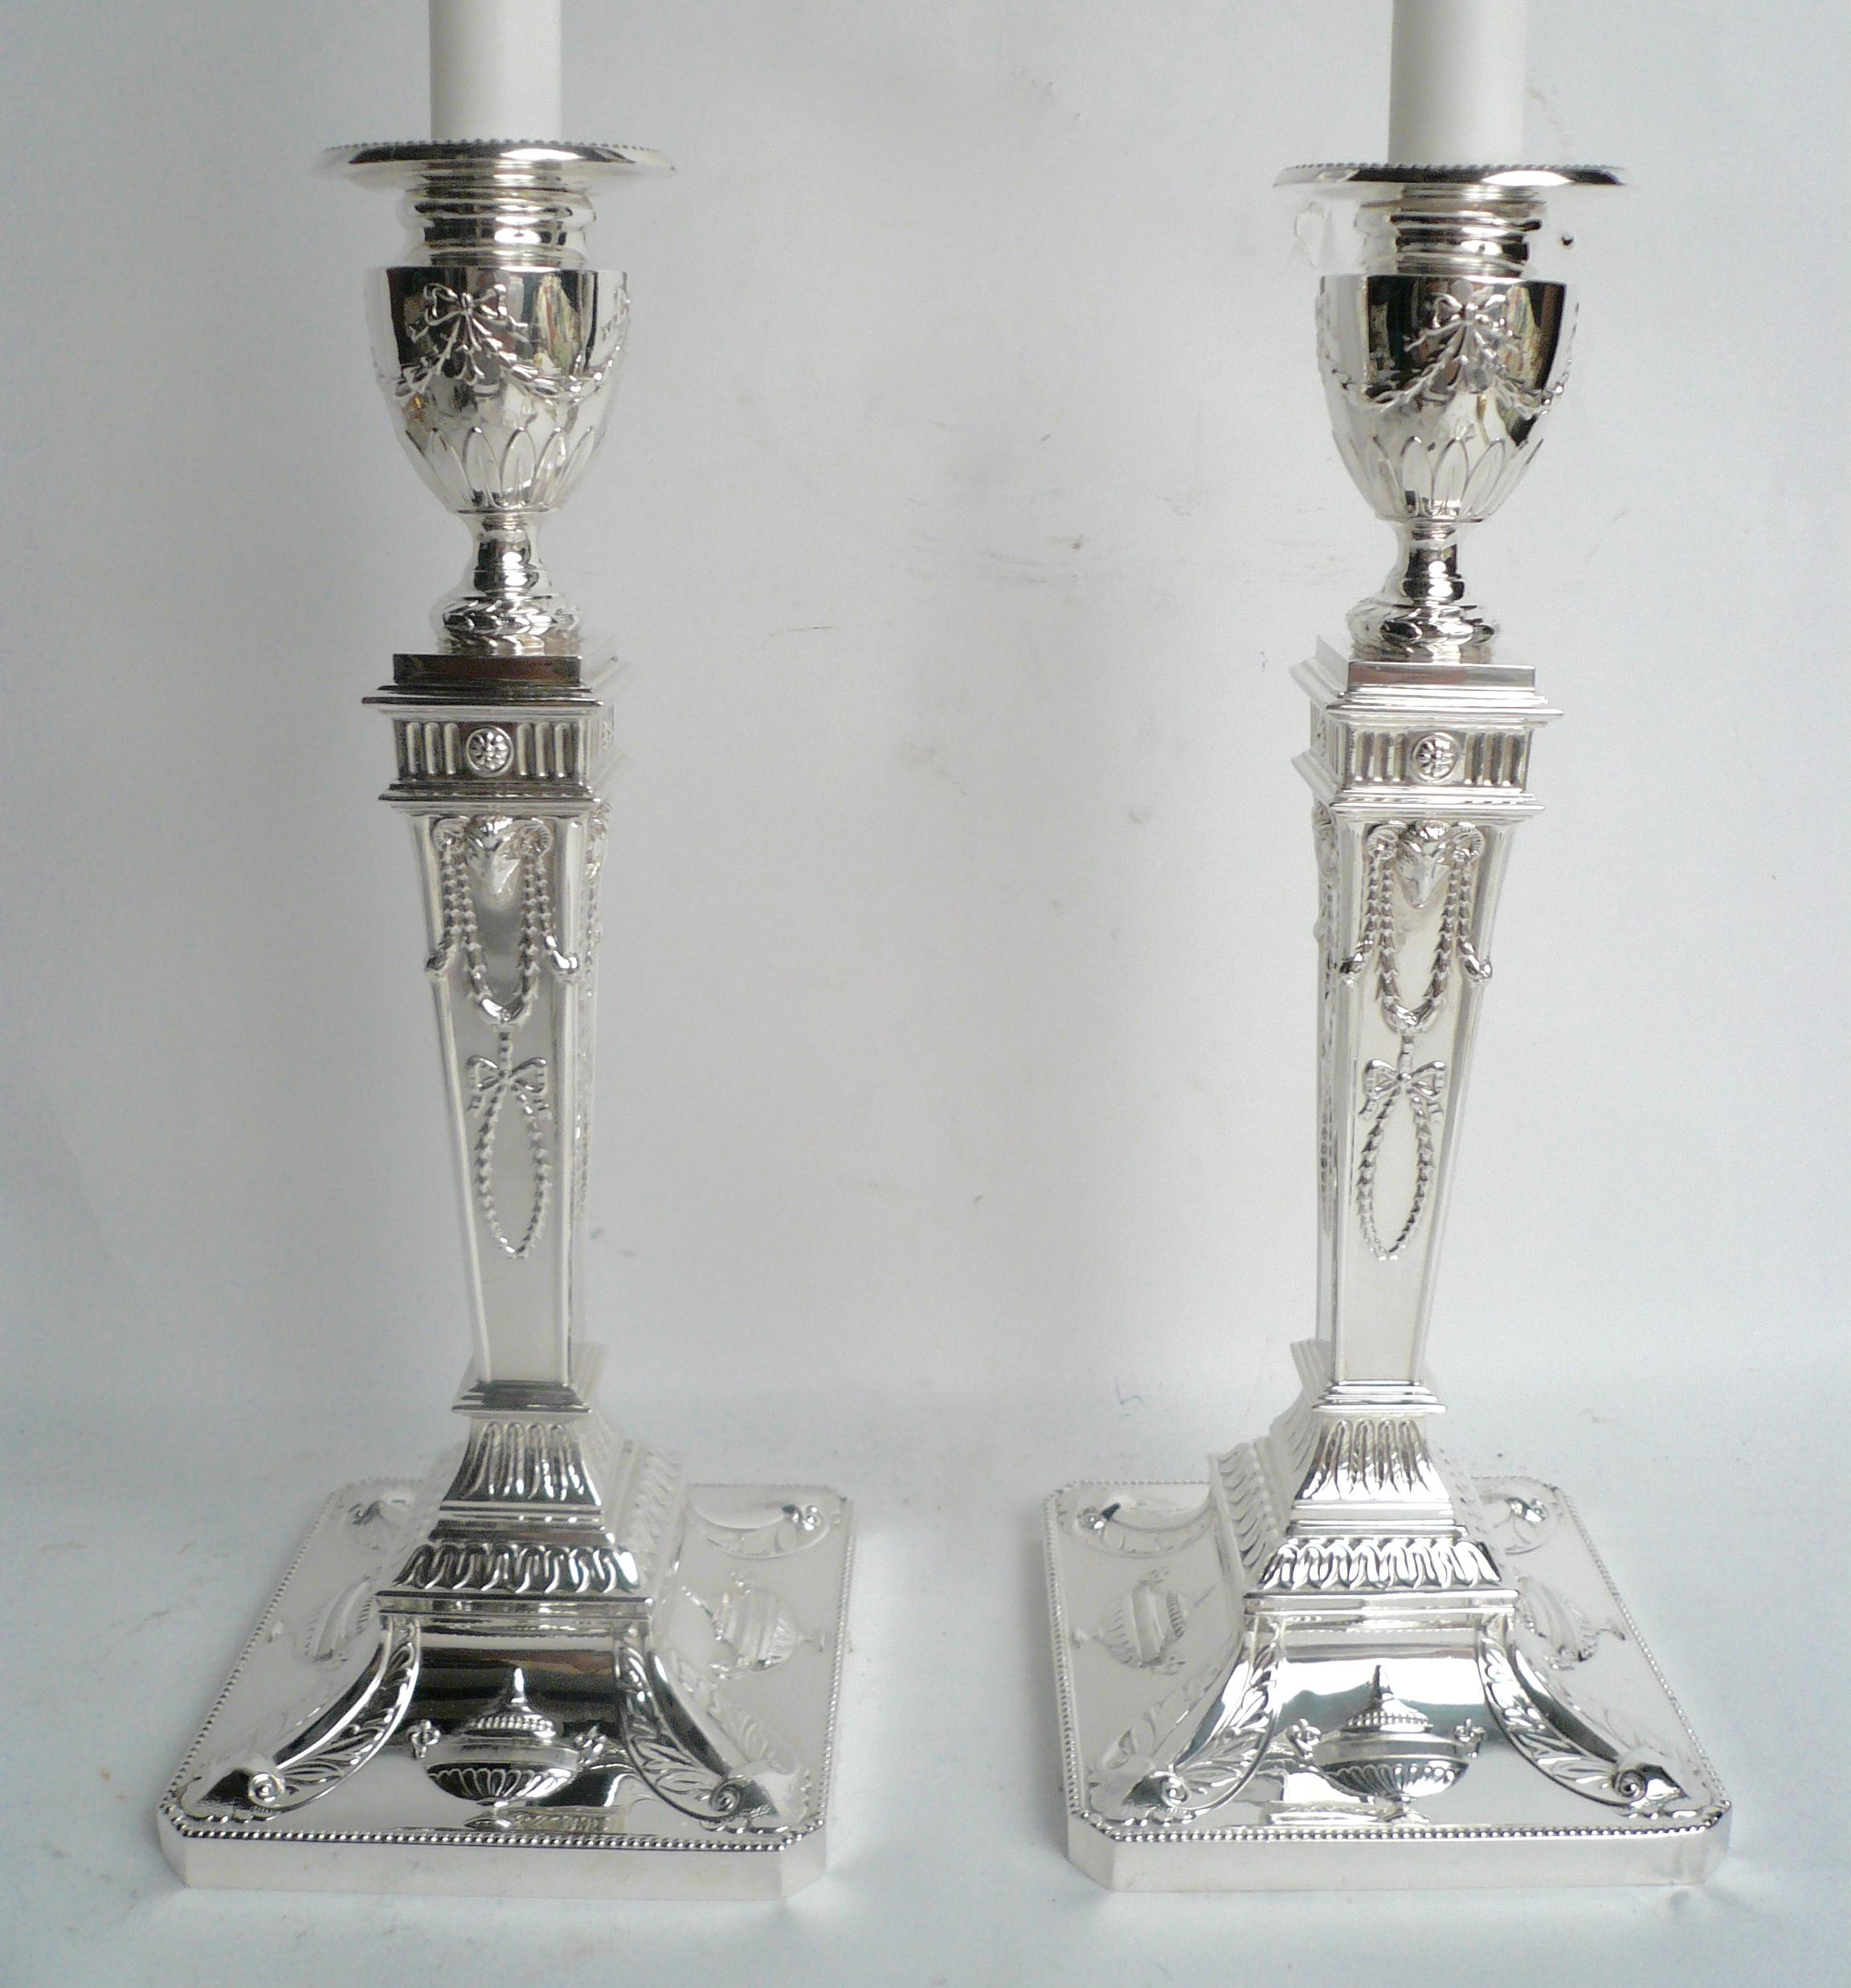 These Robert Adam style candlesticks feature neoclassical motifs, including rams heads, urns, swags, and acanthus leaves.